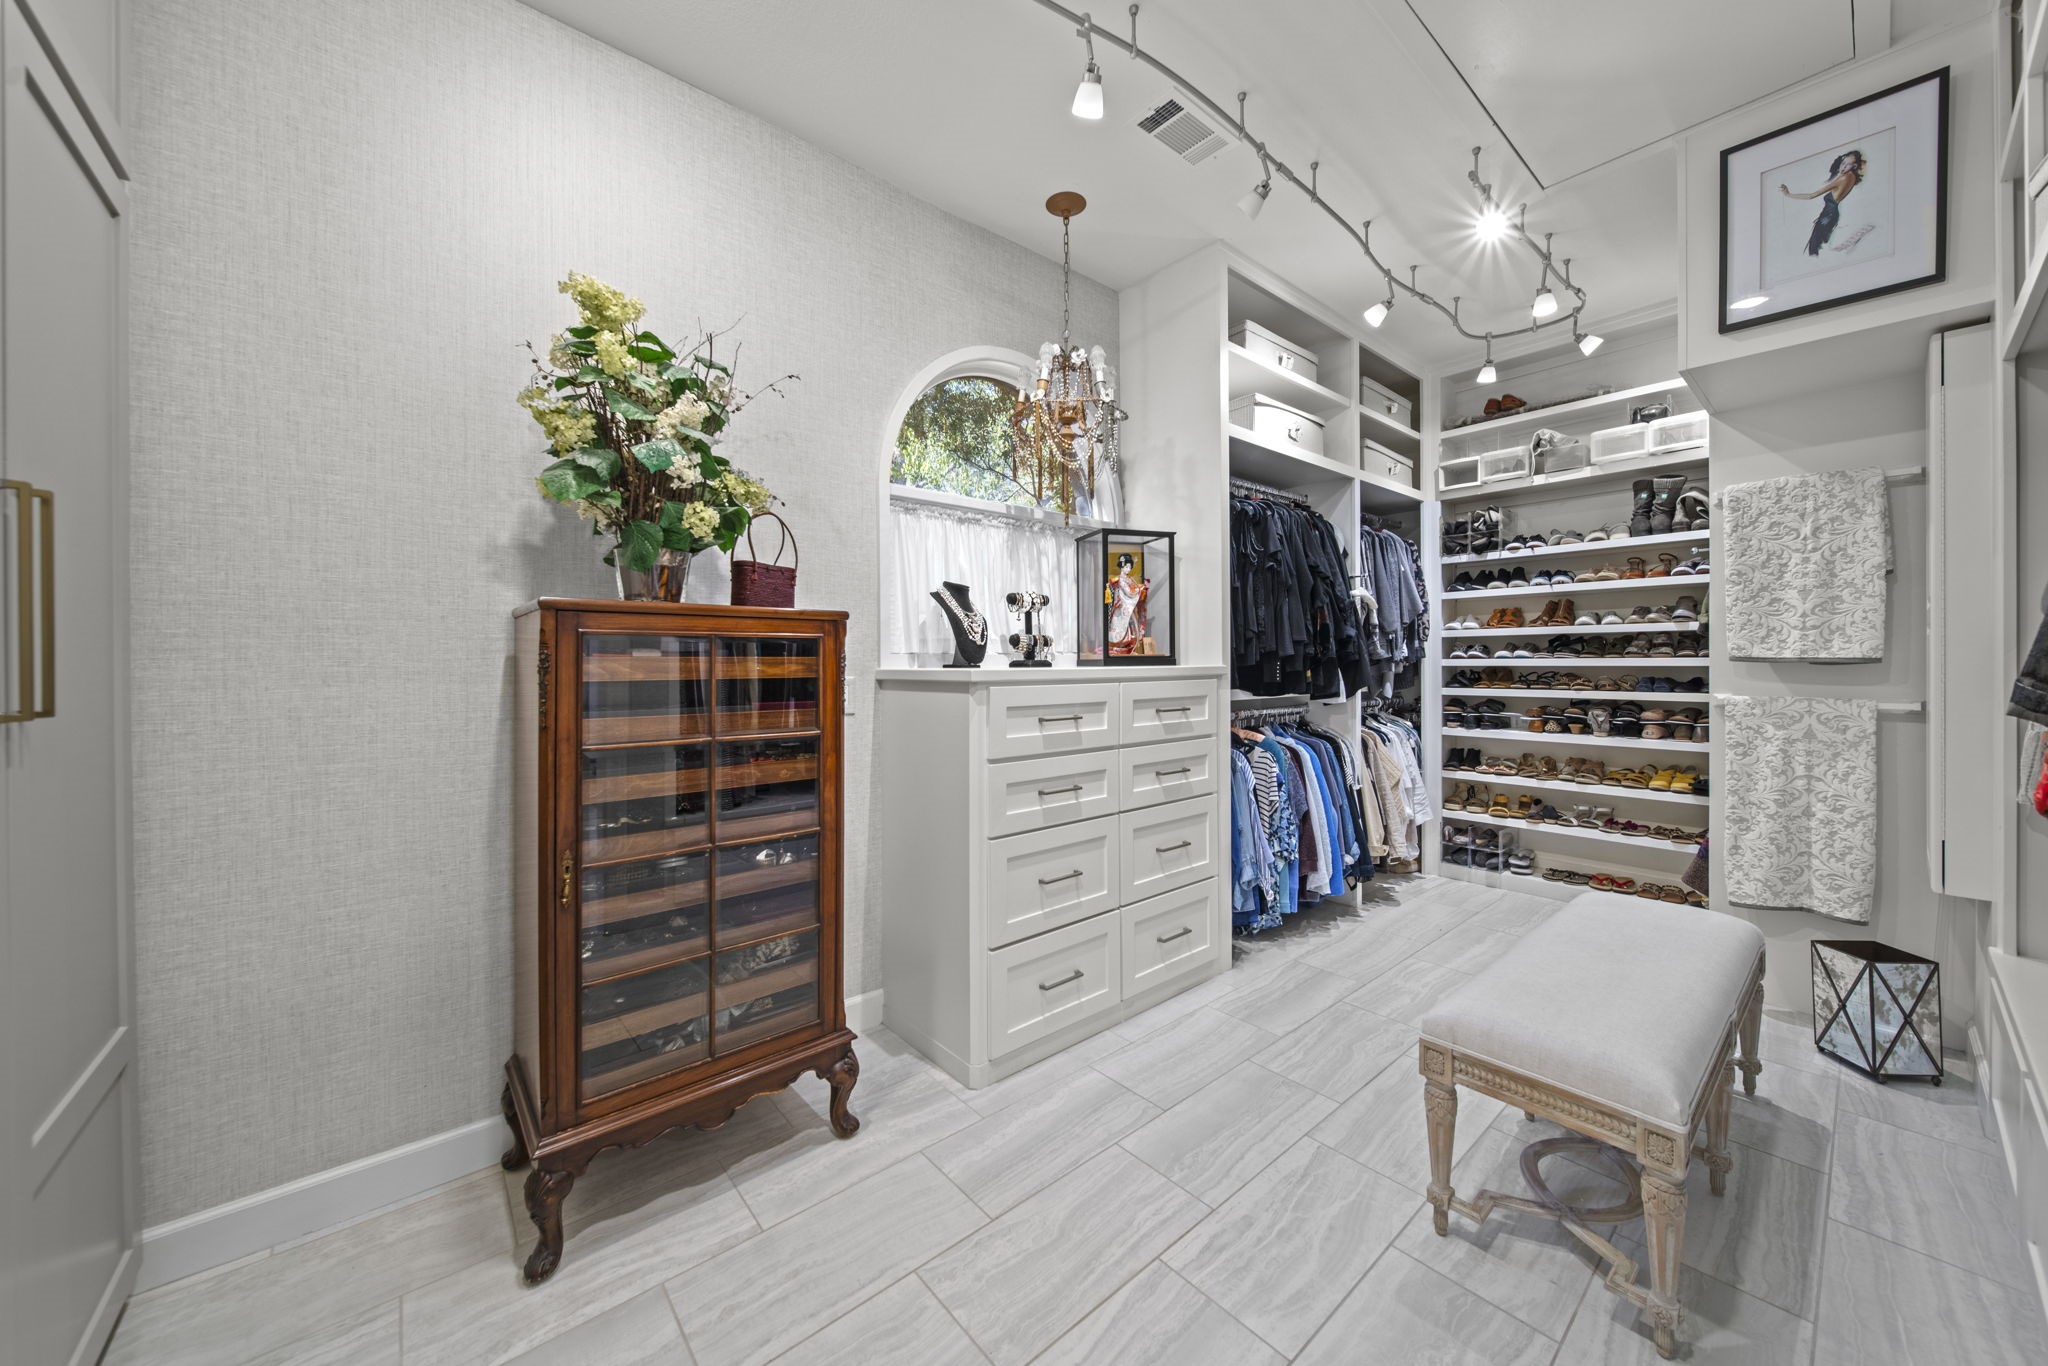 Luxurious closet with lots of space, built-ins galore including a wall ironing board very conveniently placed. Lots of room for your personal items including the custom cabinetry on the left.